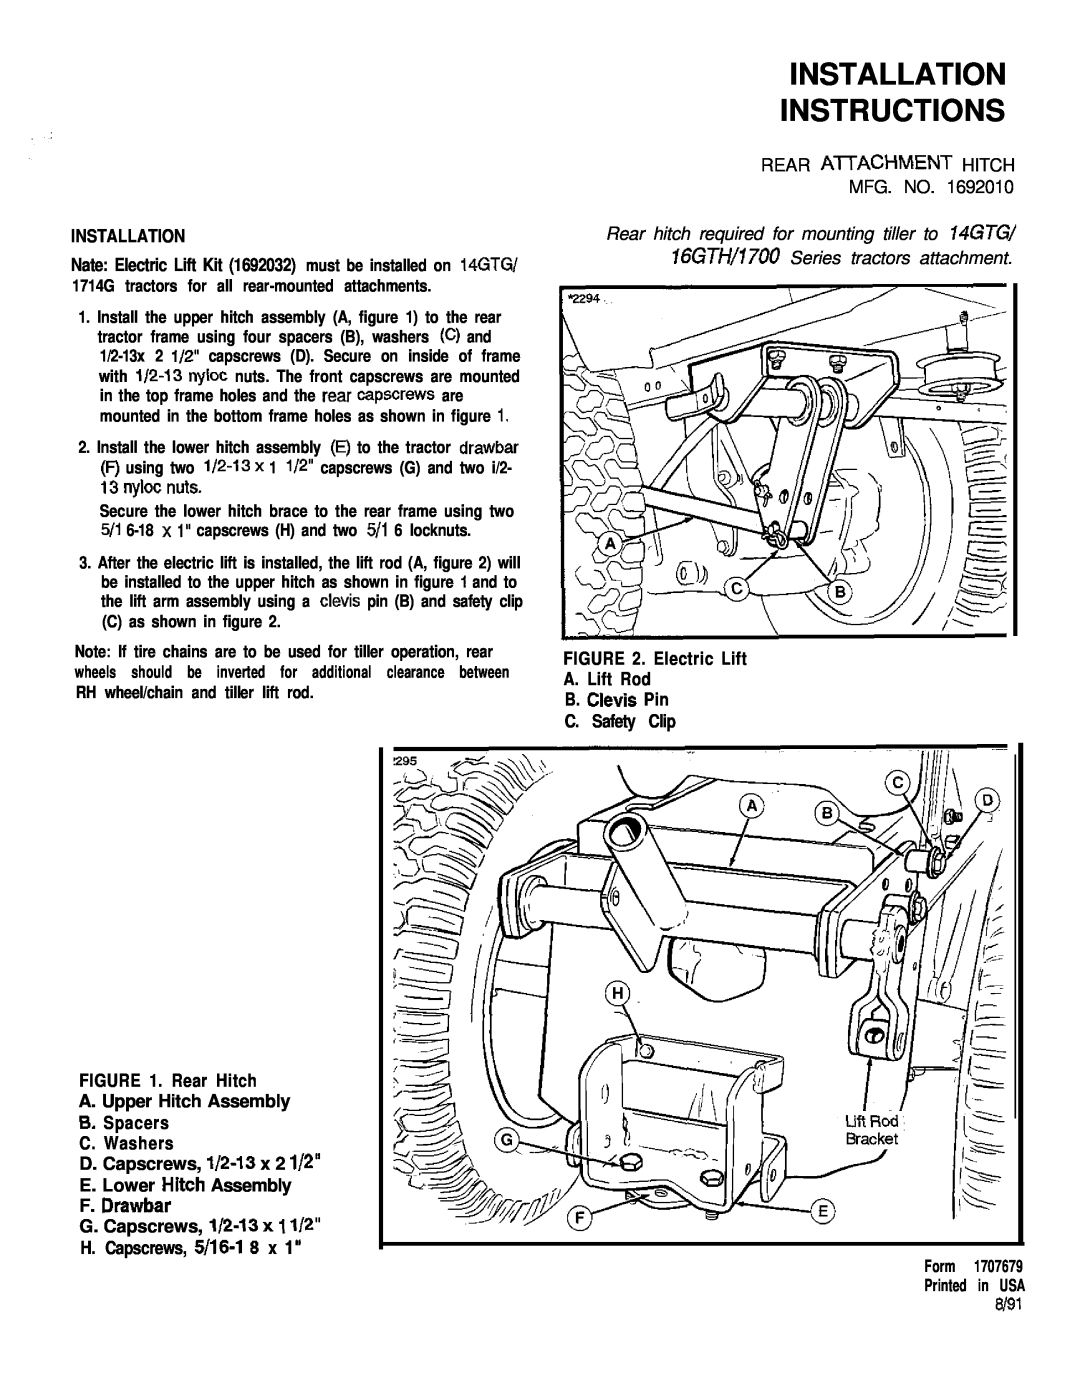 Snapper 2806 installation instructions Installation Instructions, Rear Hitch A. Upper Hitch Assembly, C as shown in figure 